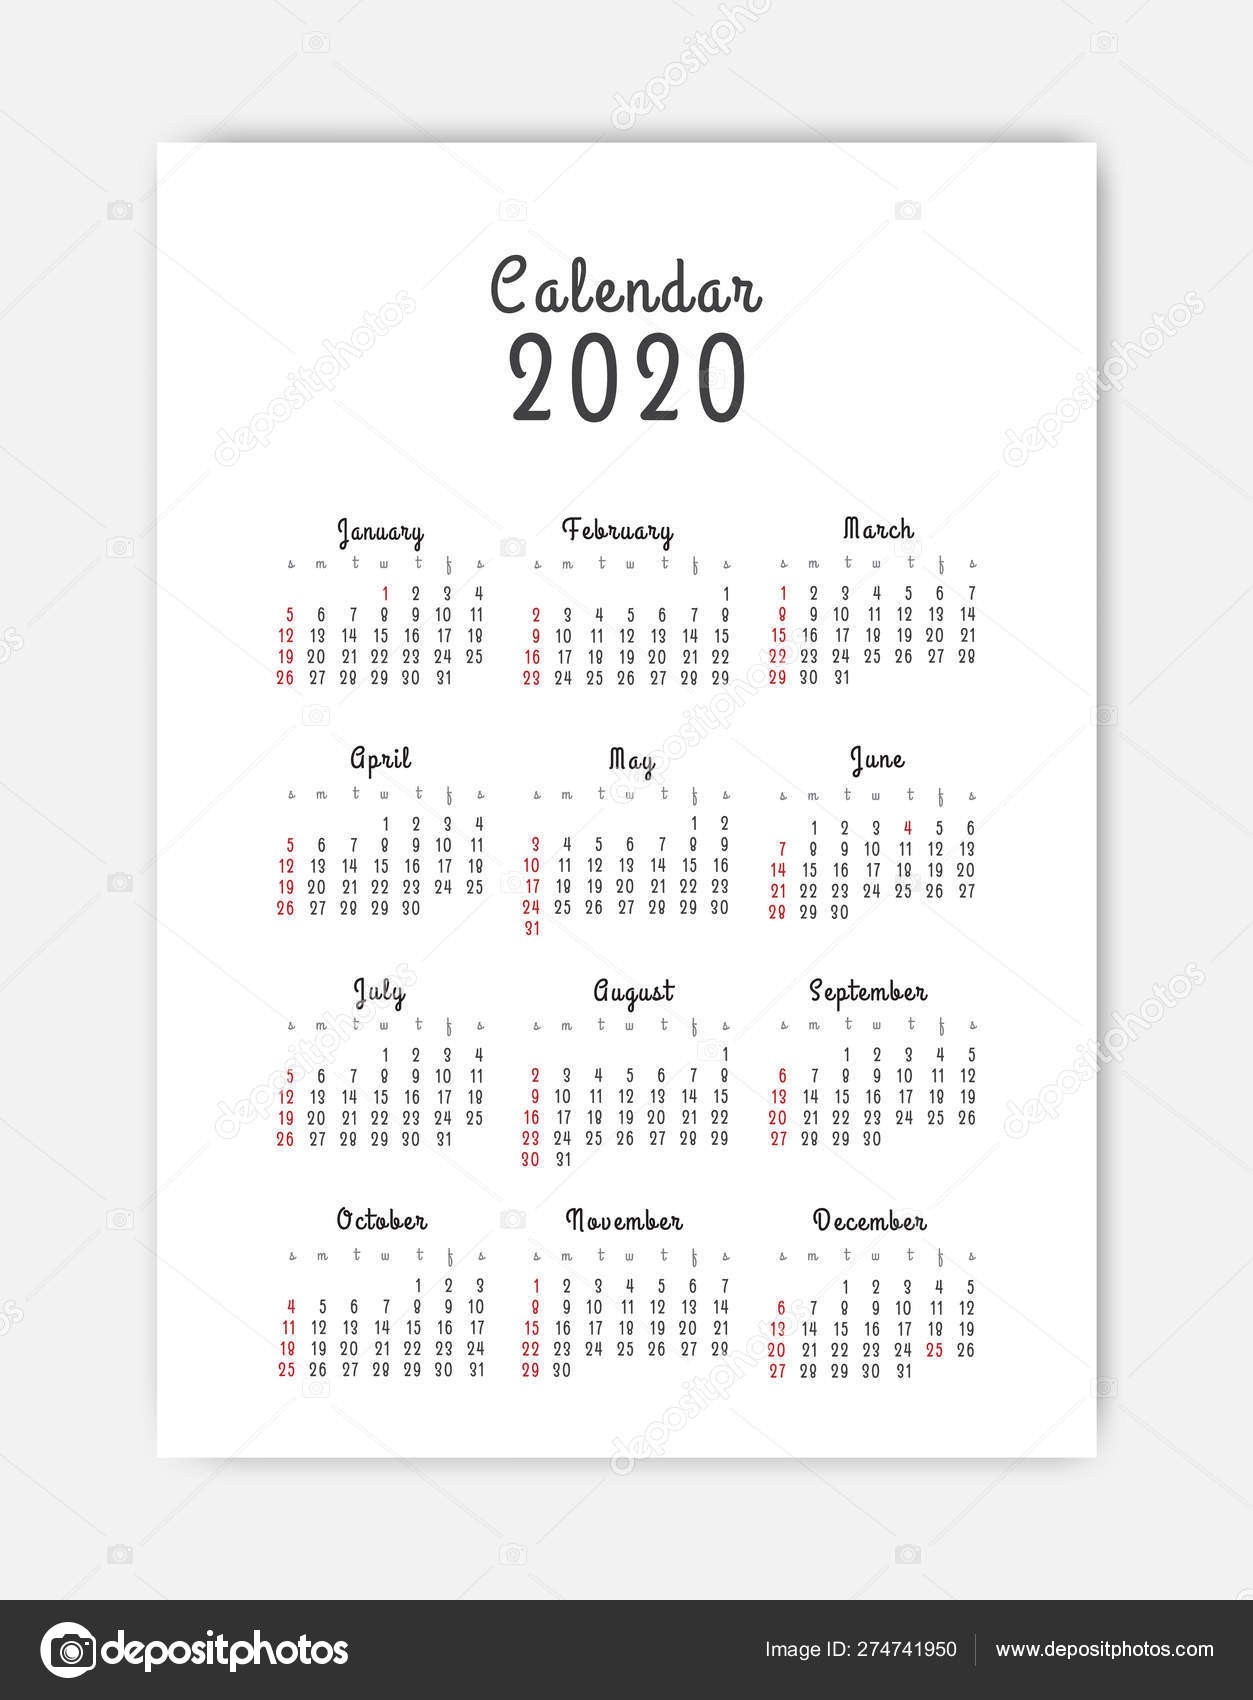 Calendar 2020 Template. 12 Months. Include Holiday Event-W 9 Template 2020